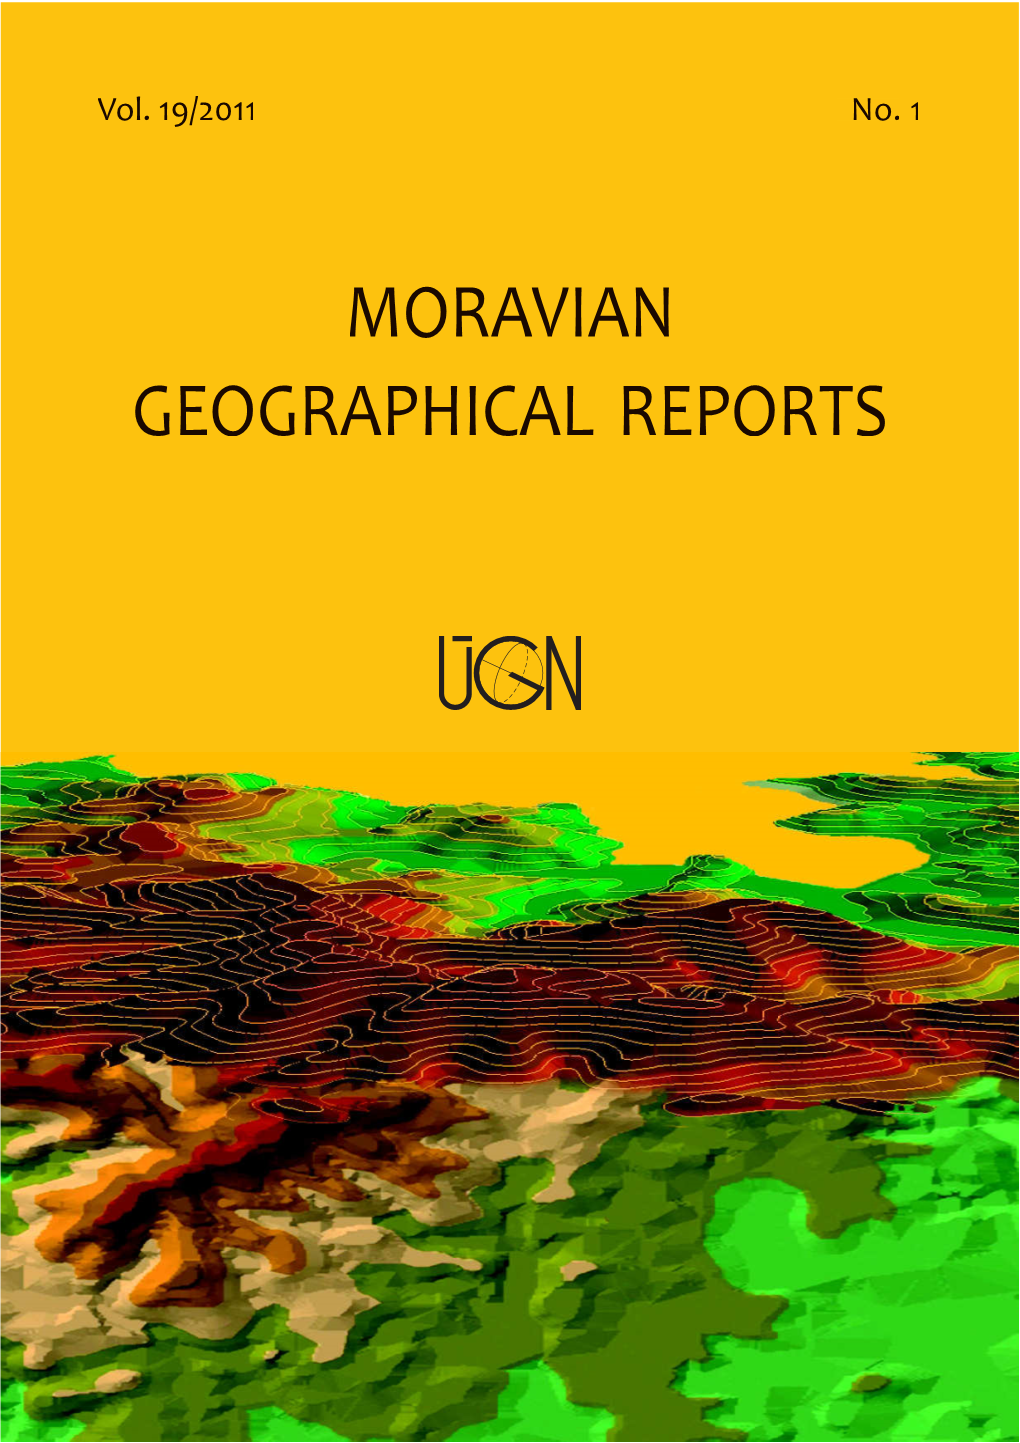 MORAVIAN GEOGRAPHICAL REPORTS Vol